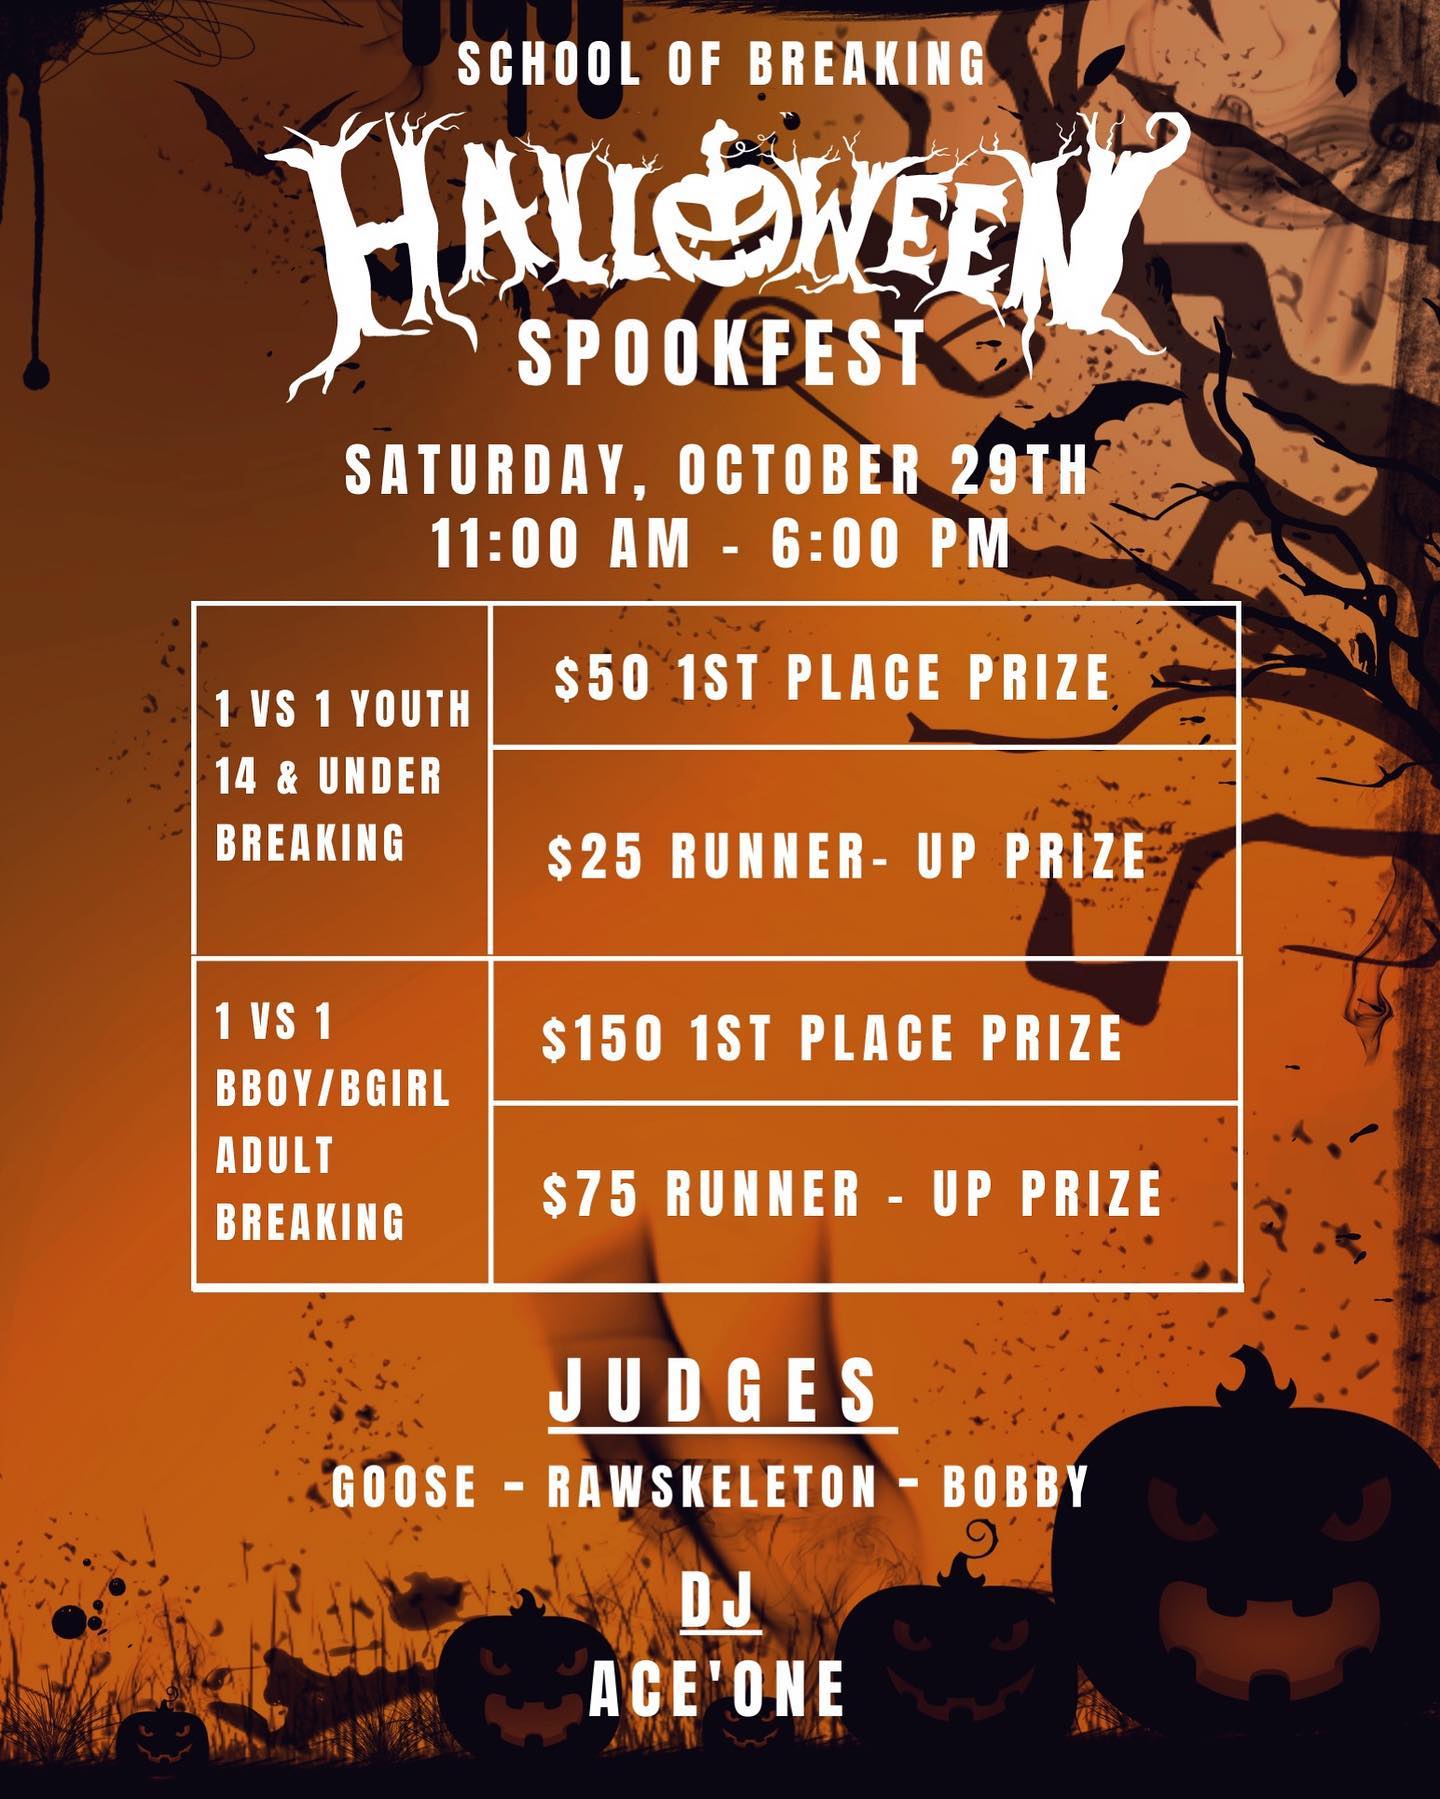 Who’s ready for “Spookfest” going down tomorrow 👻😱 

It’s time to get spooky with it. Come battle it out in your costume for cash and prizes 
🦹🏼‍♀️💰🏆

💥1 vs 1 Youth Breaking 14 & under Breaking ( Hosted by @scrappybreakers )

💥1 vs 1 Adult Breaking 
💥Haunted house 
💥Trunk-Or-Treat 
💥Halloween costume contest 

💥Judges - @gustavoavelar27 @sunraw_tfs @bobbybrownrice 

💥DJ @aceonemusic 

This year we will have a spooky haunted house and a Trunk-Or-Treat 🍭🎃 And we couldn’t have a Halloween jam without a costume contest 🧛🏾‍♂️🧙‍♀️

For more info and to purchase tickets, link in bio. 

#schoolofbreaking #halloween #jam #spookfest #youth #breaking #battles #bboy #bgirl #lifestyle #hiphop #streetdance #culture #expressfreely #peace #love #unity #havingfun